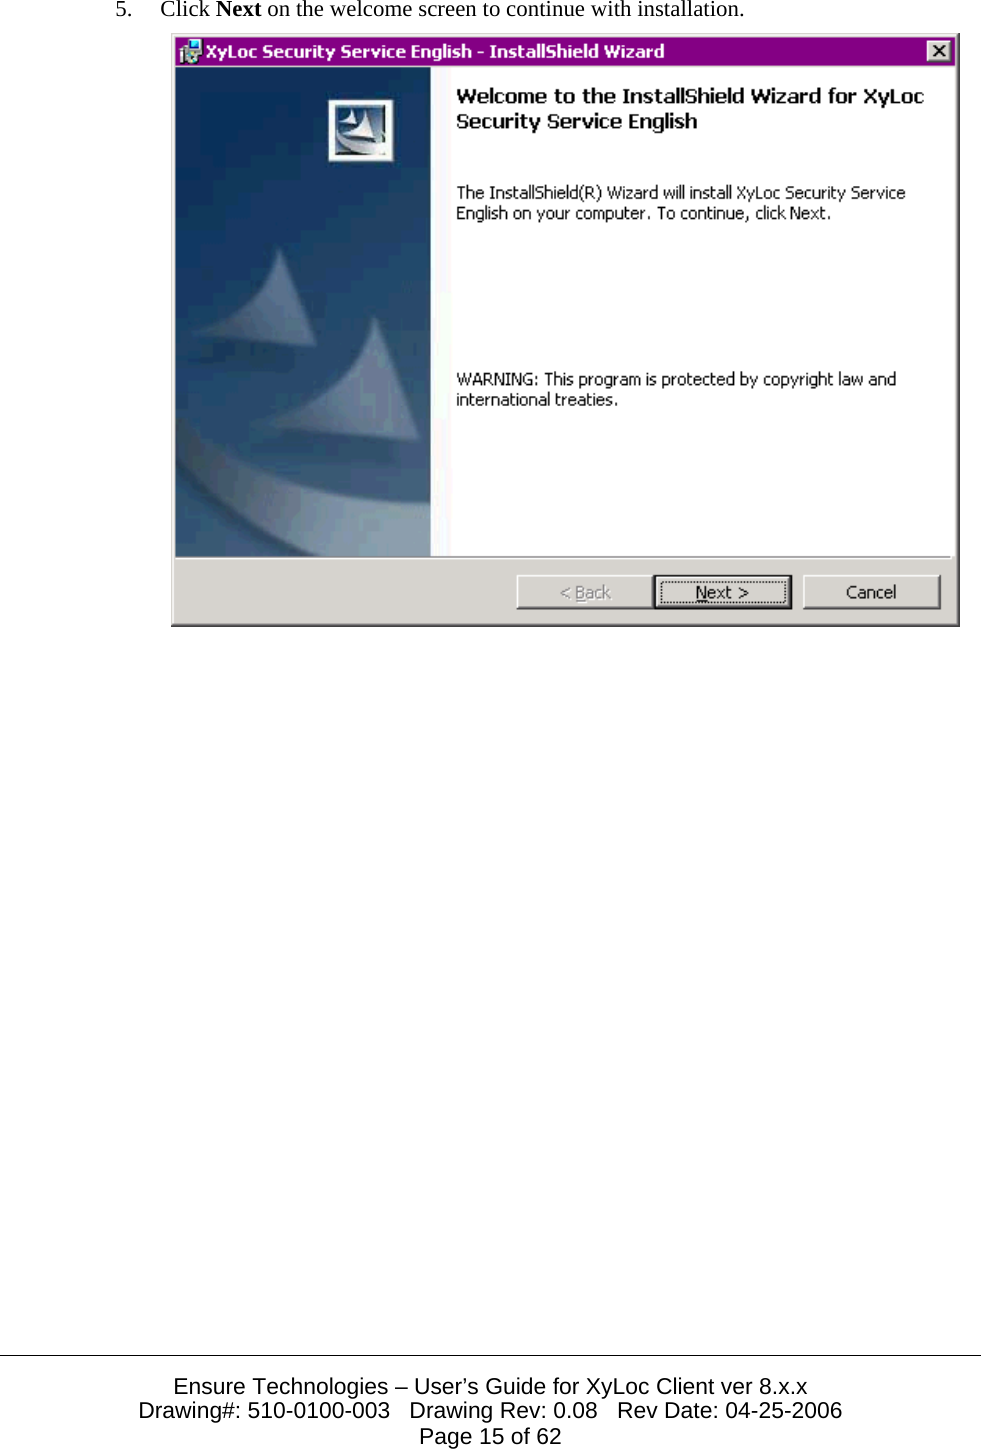  Ensure Technologies – User’s Guide for XyLoc Client ver 8.x.x Drawing#: 510-0100-003   Drawing Rev: 0.08   Rev Date: 04-25-2006 Page 15 of 62 5. Click Next on the welcome screen to continue with installation.  